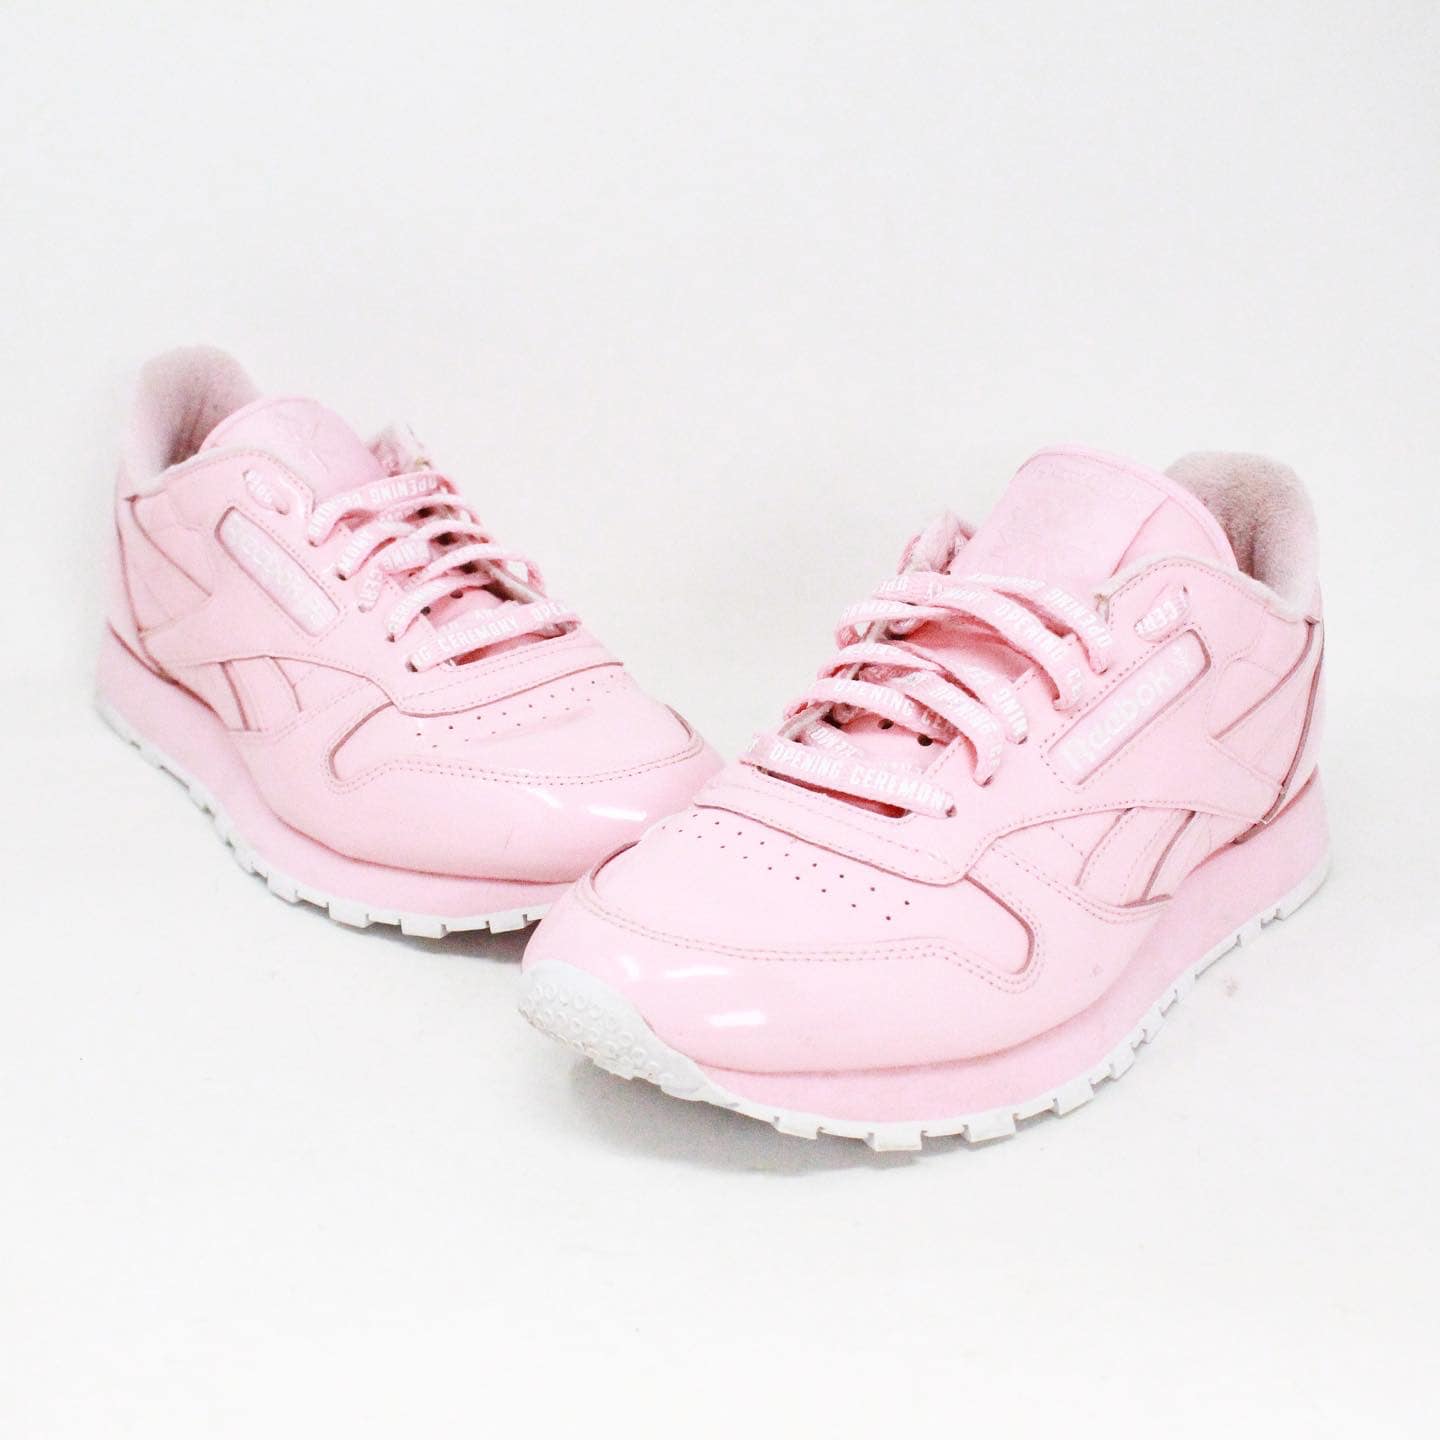 REEBOK 40064 Pink Opening Ceremony X Classic Leather Sneakers US 8 EU 38 a